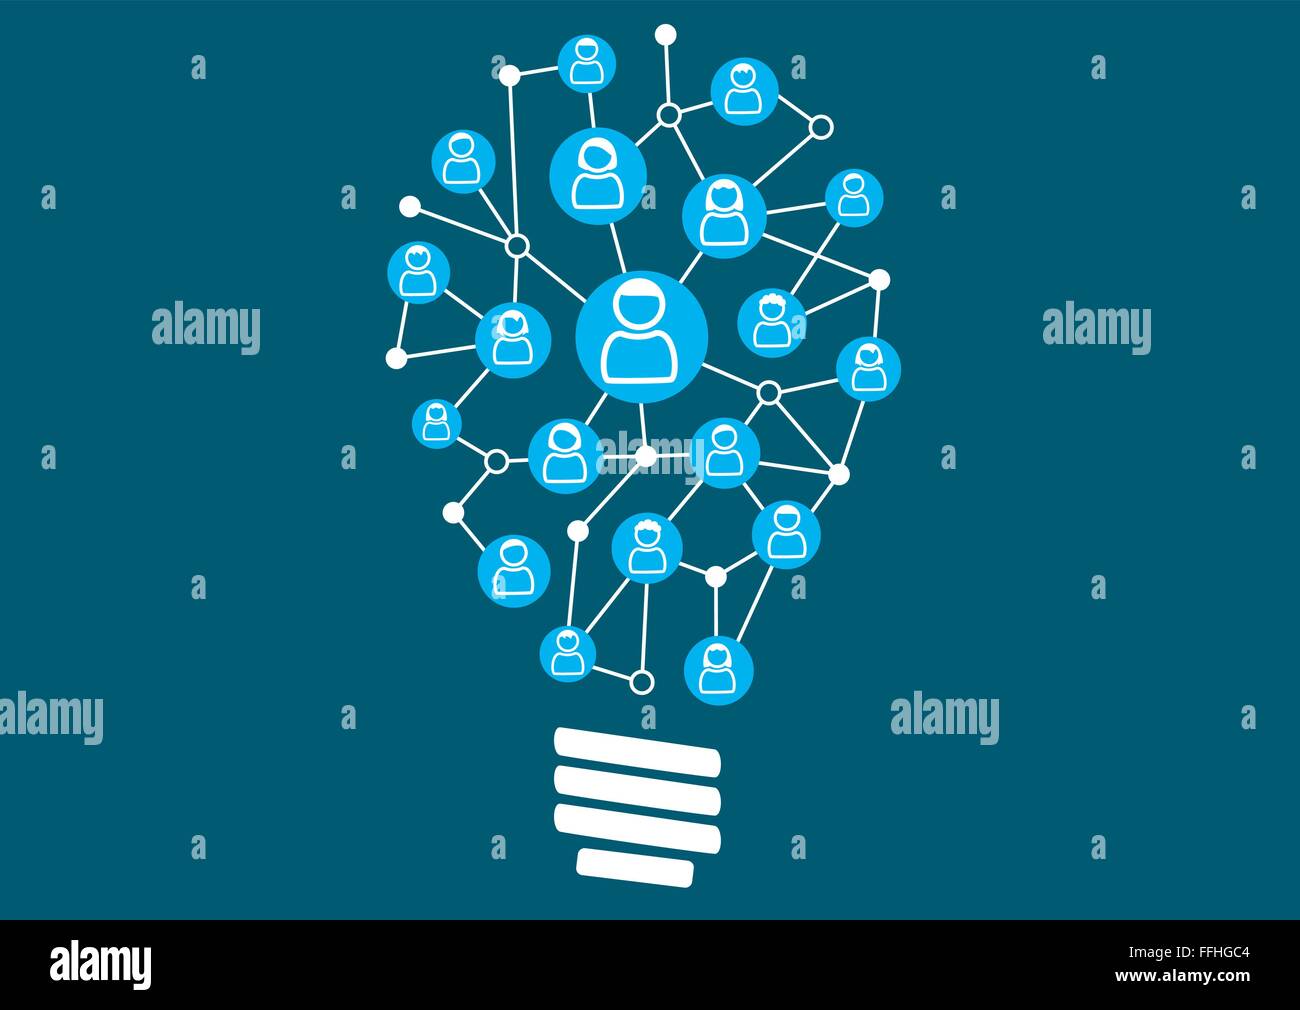 Social crowd sourcing and ideation. Swarm intelligence by the social community of a business or company. Stock Vector